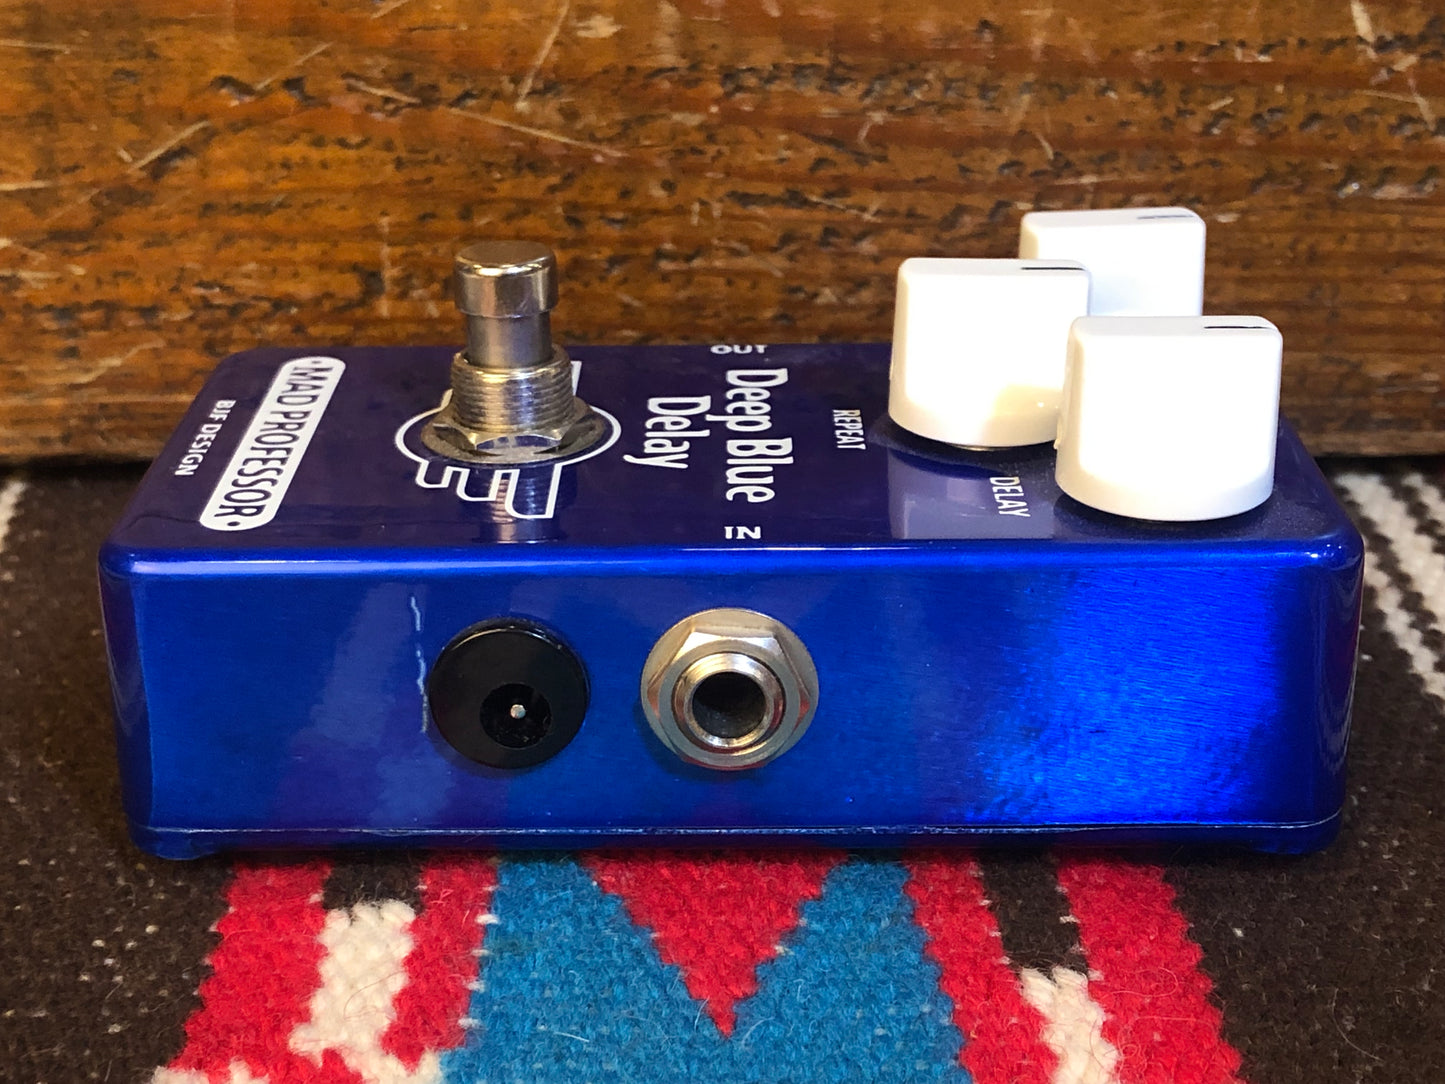 Mad Professor Hand Wired Deep Blue Delay Pedal w/ Box